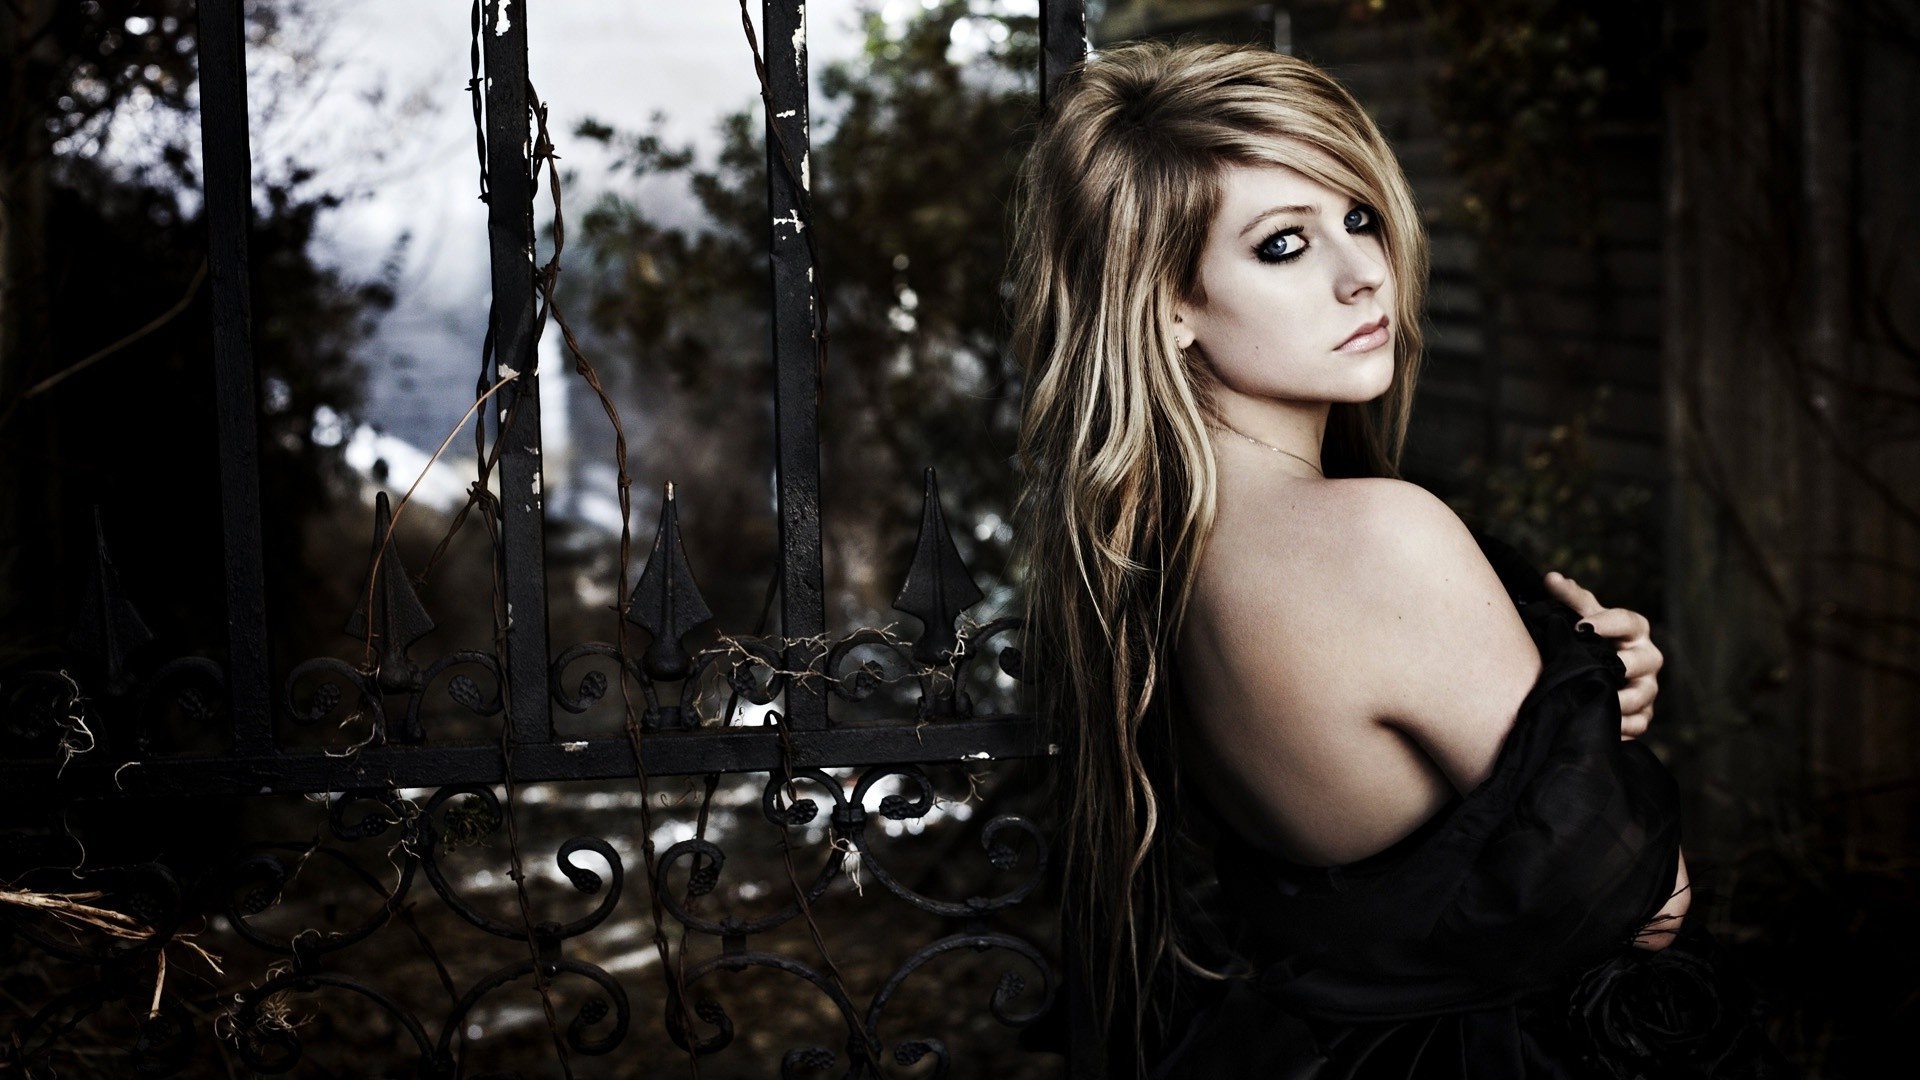 Avril Lavigne, Gothic-style wallpaper, Wallhaven image gallery, 1920x1080 Full HD Desktop